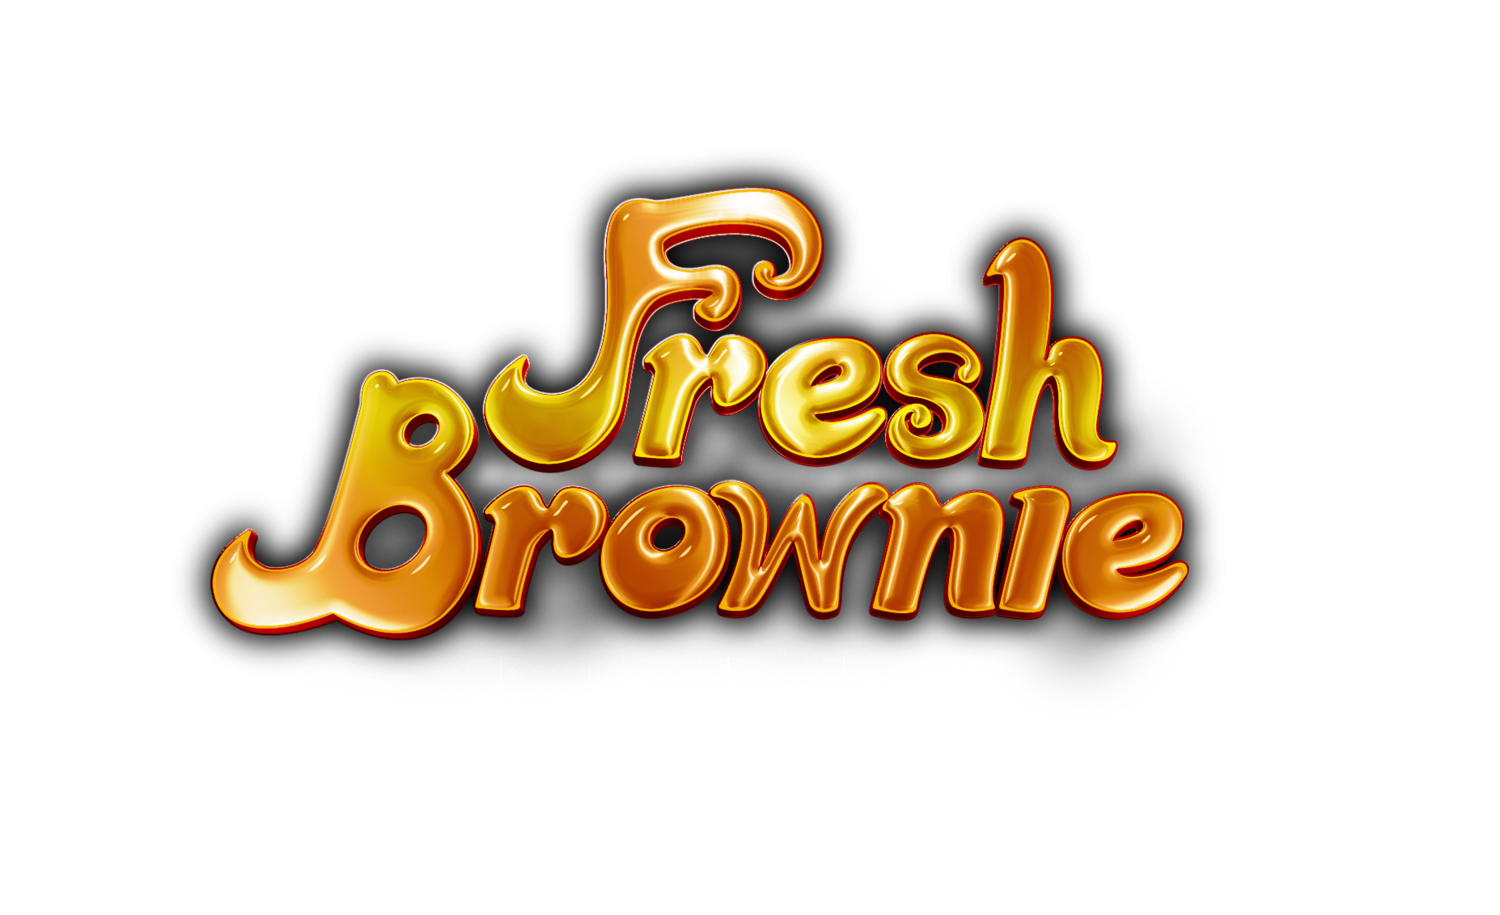 Fresh Brownie Productions